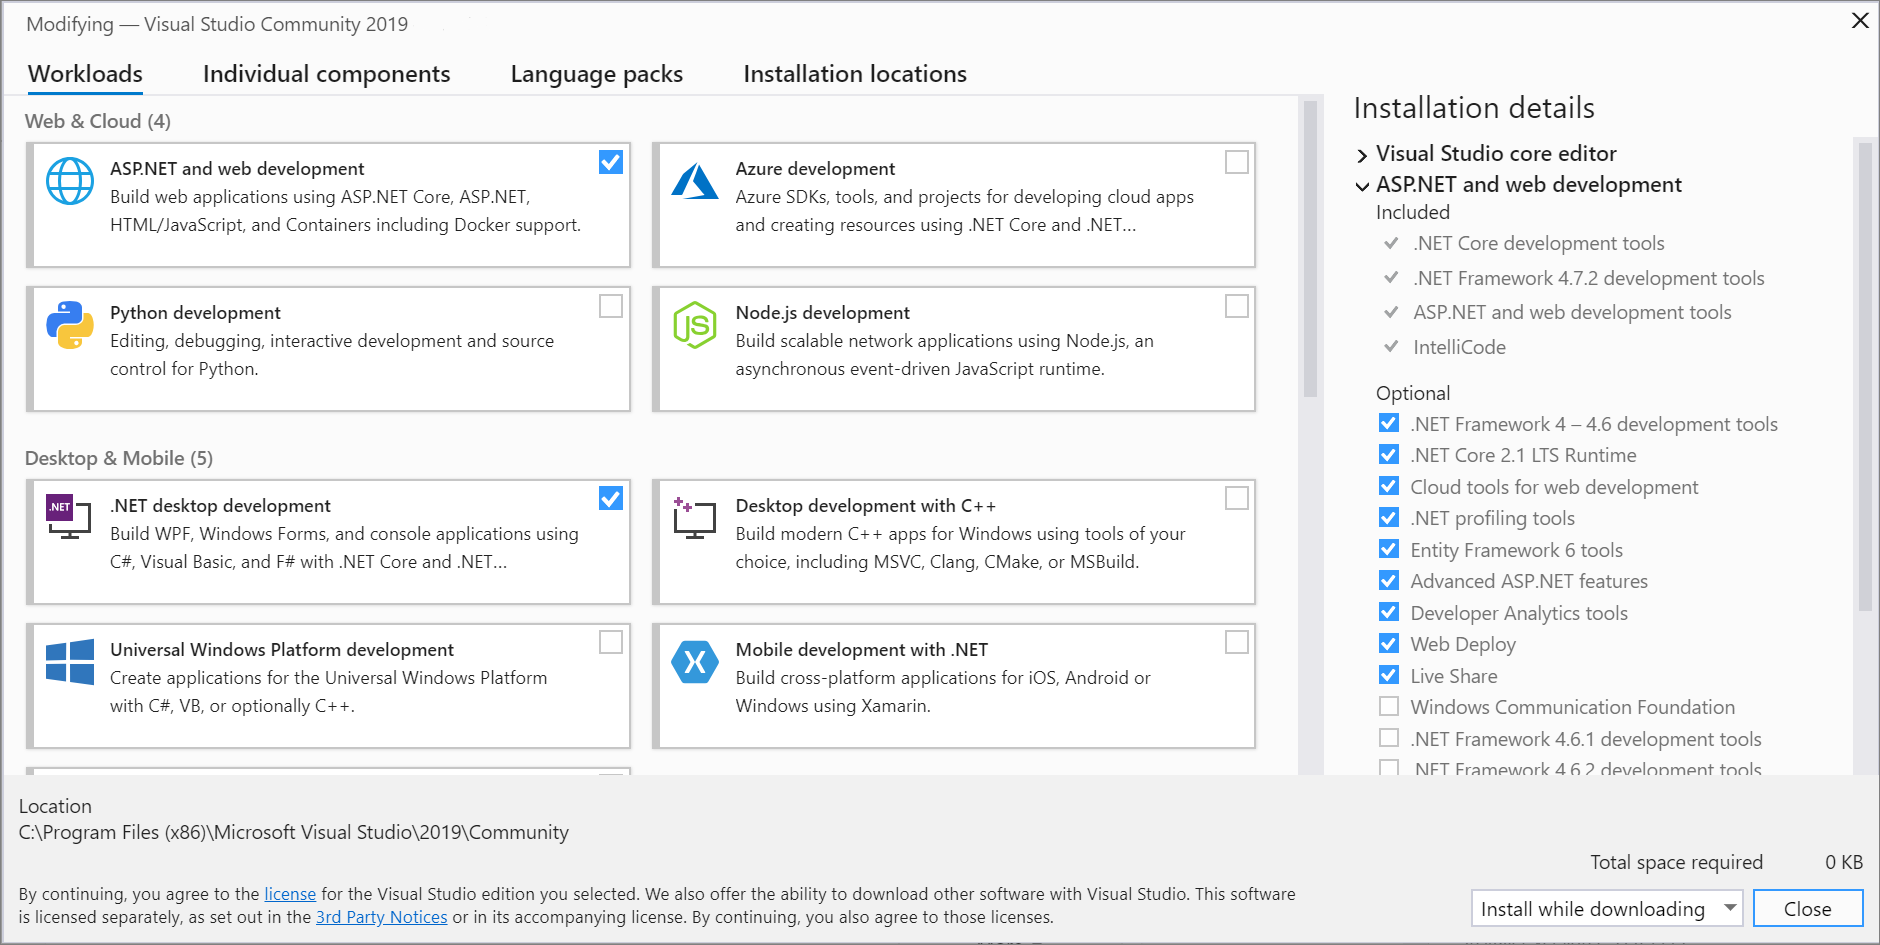 Screenshot showing the Workloads tab of the Visual Studio Installer.